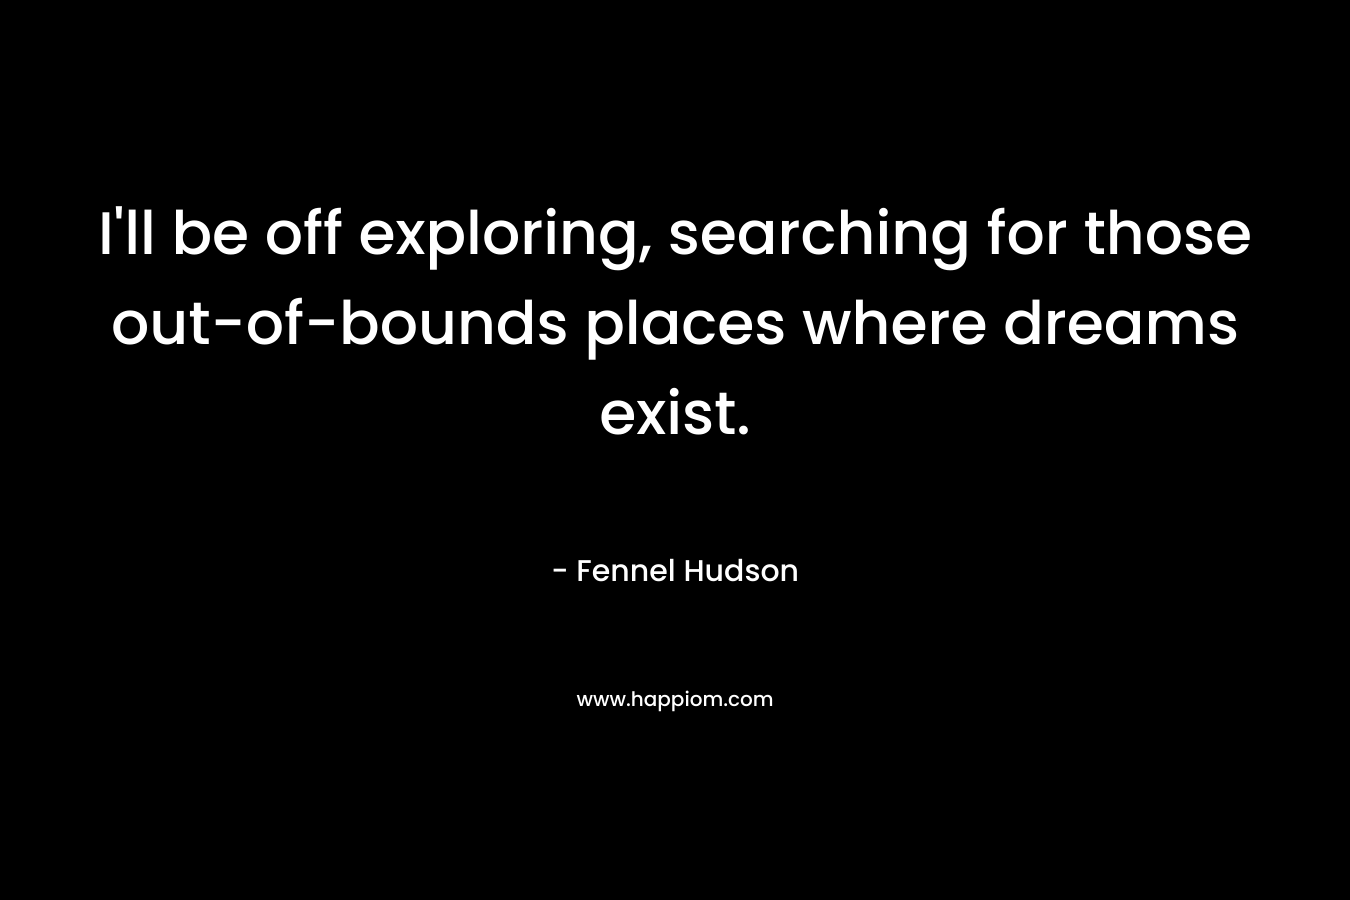 I'll be off exploring, searching for those out-of-bounds places where dreams exist.